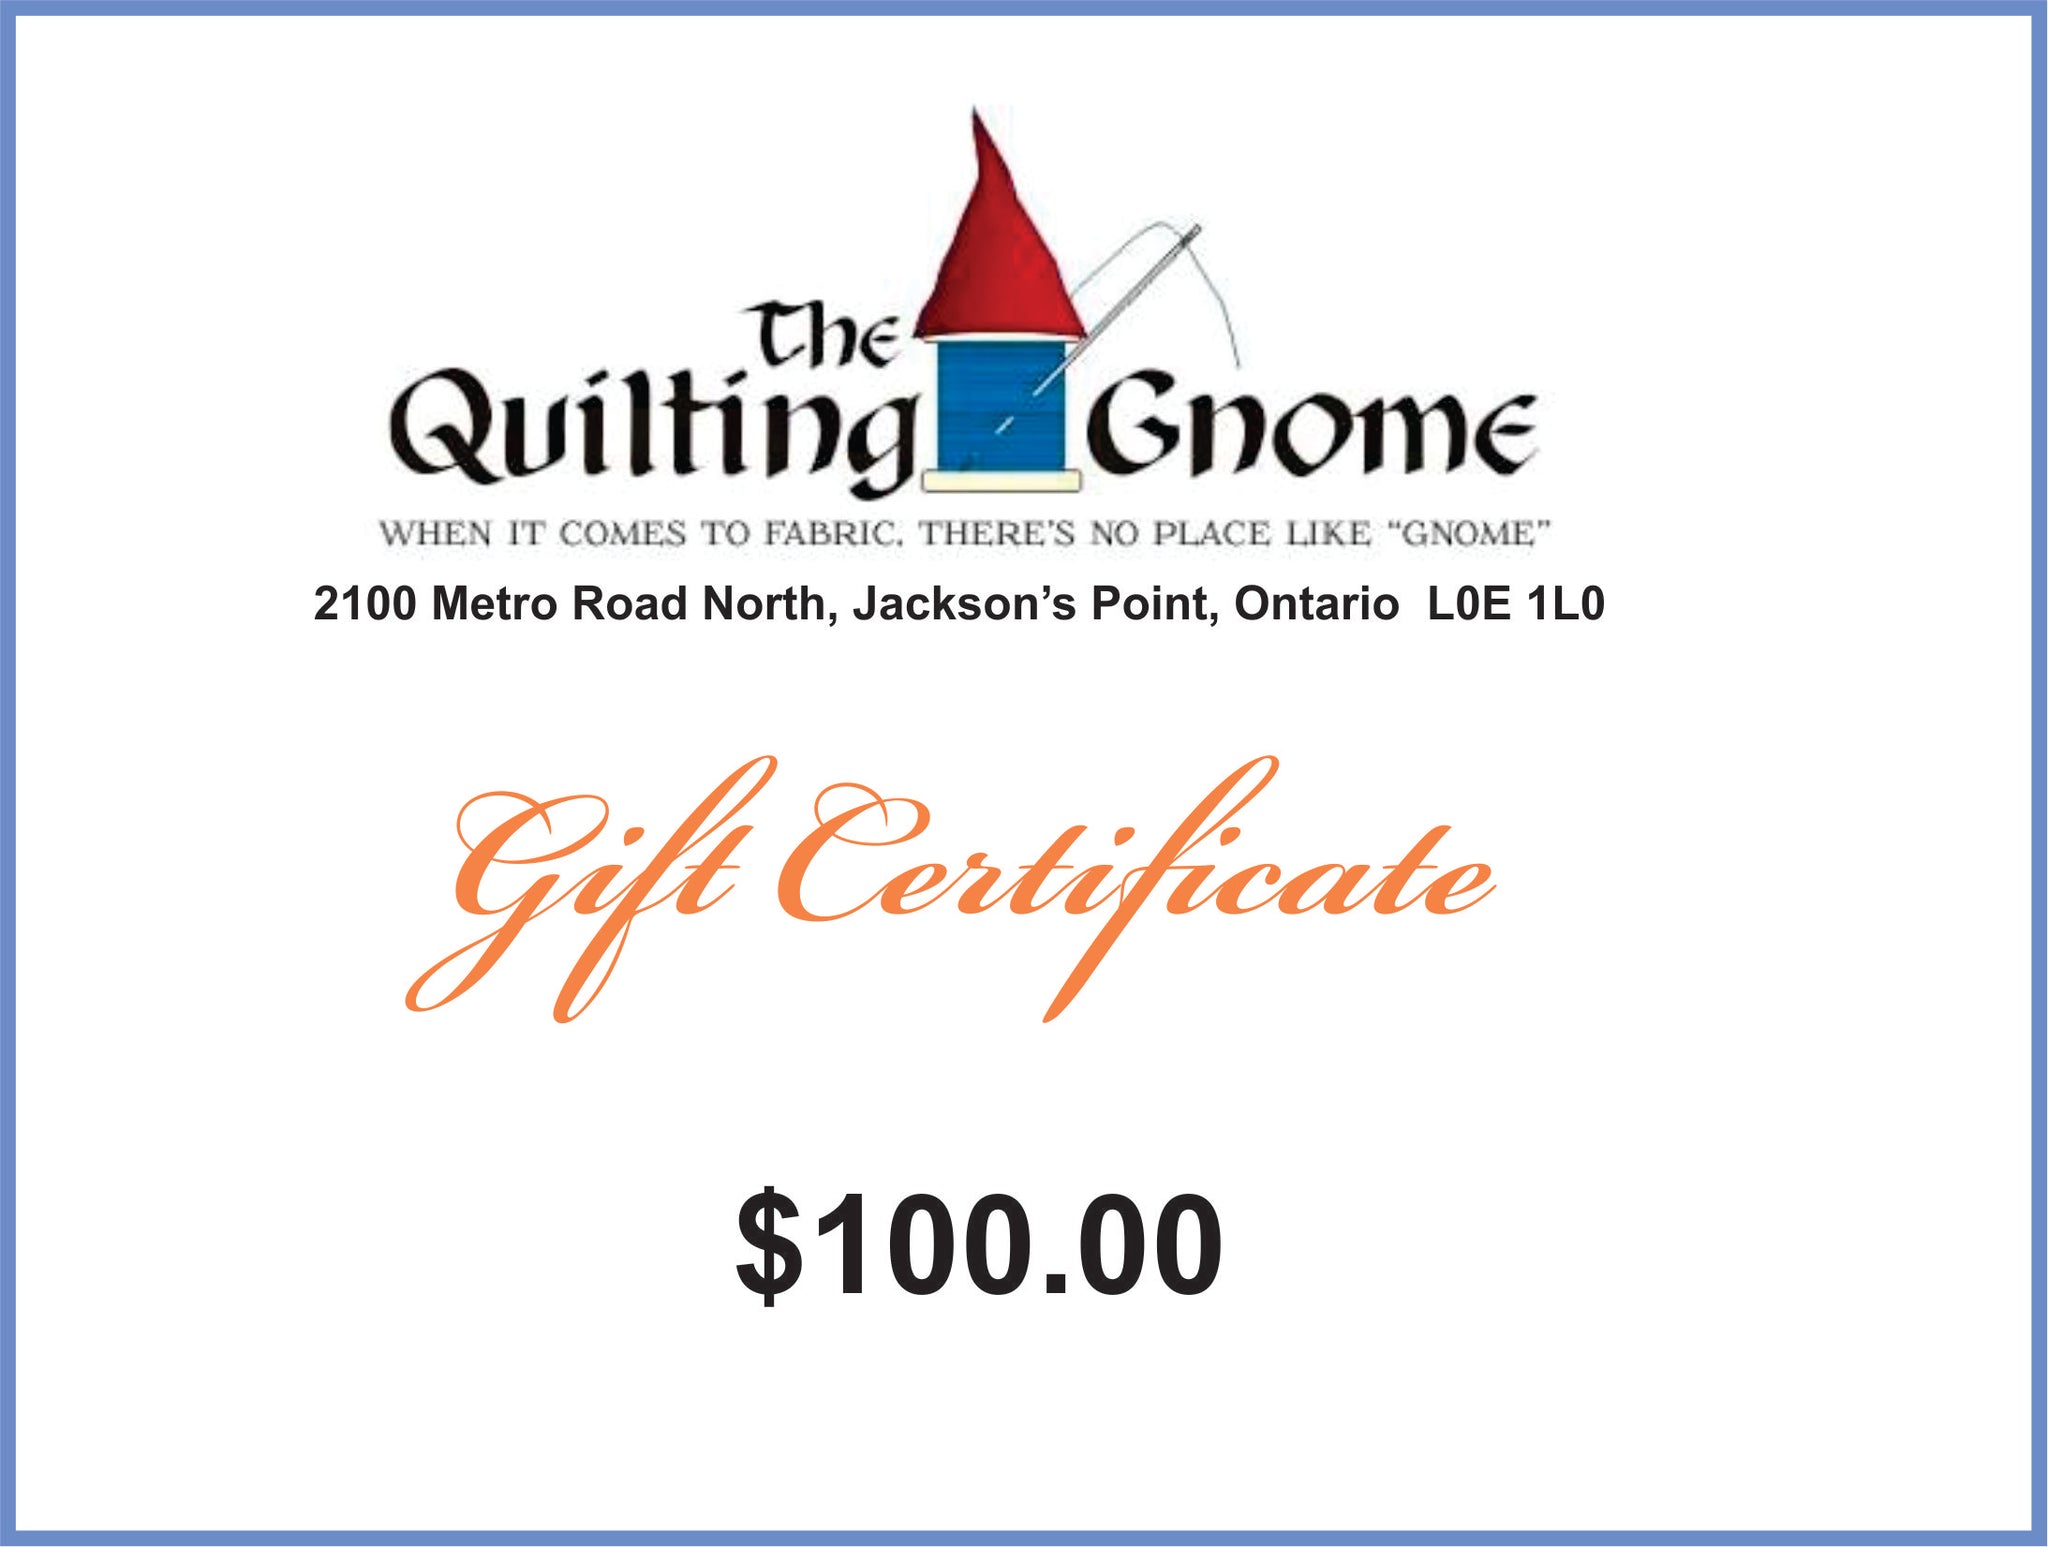 Gift Certificate $100.00 - The Quilting Gnome